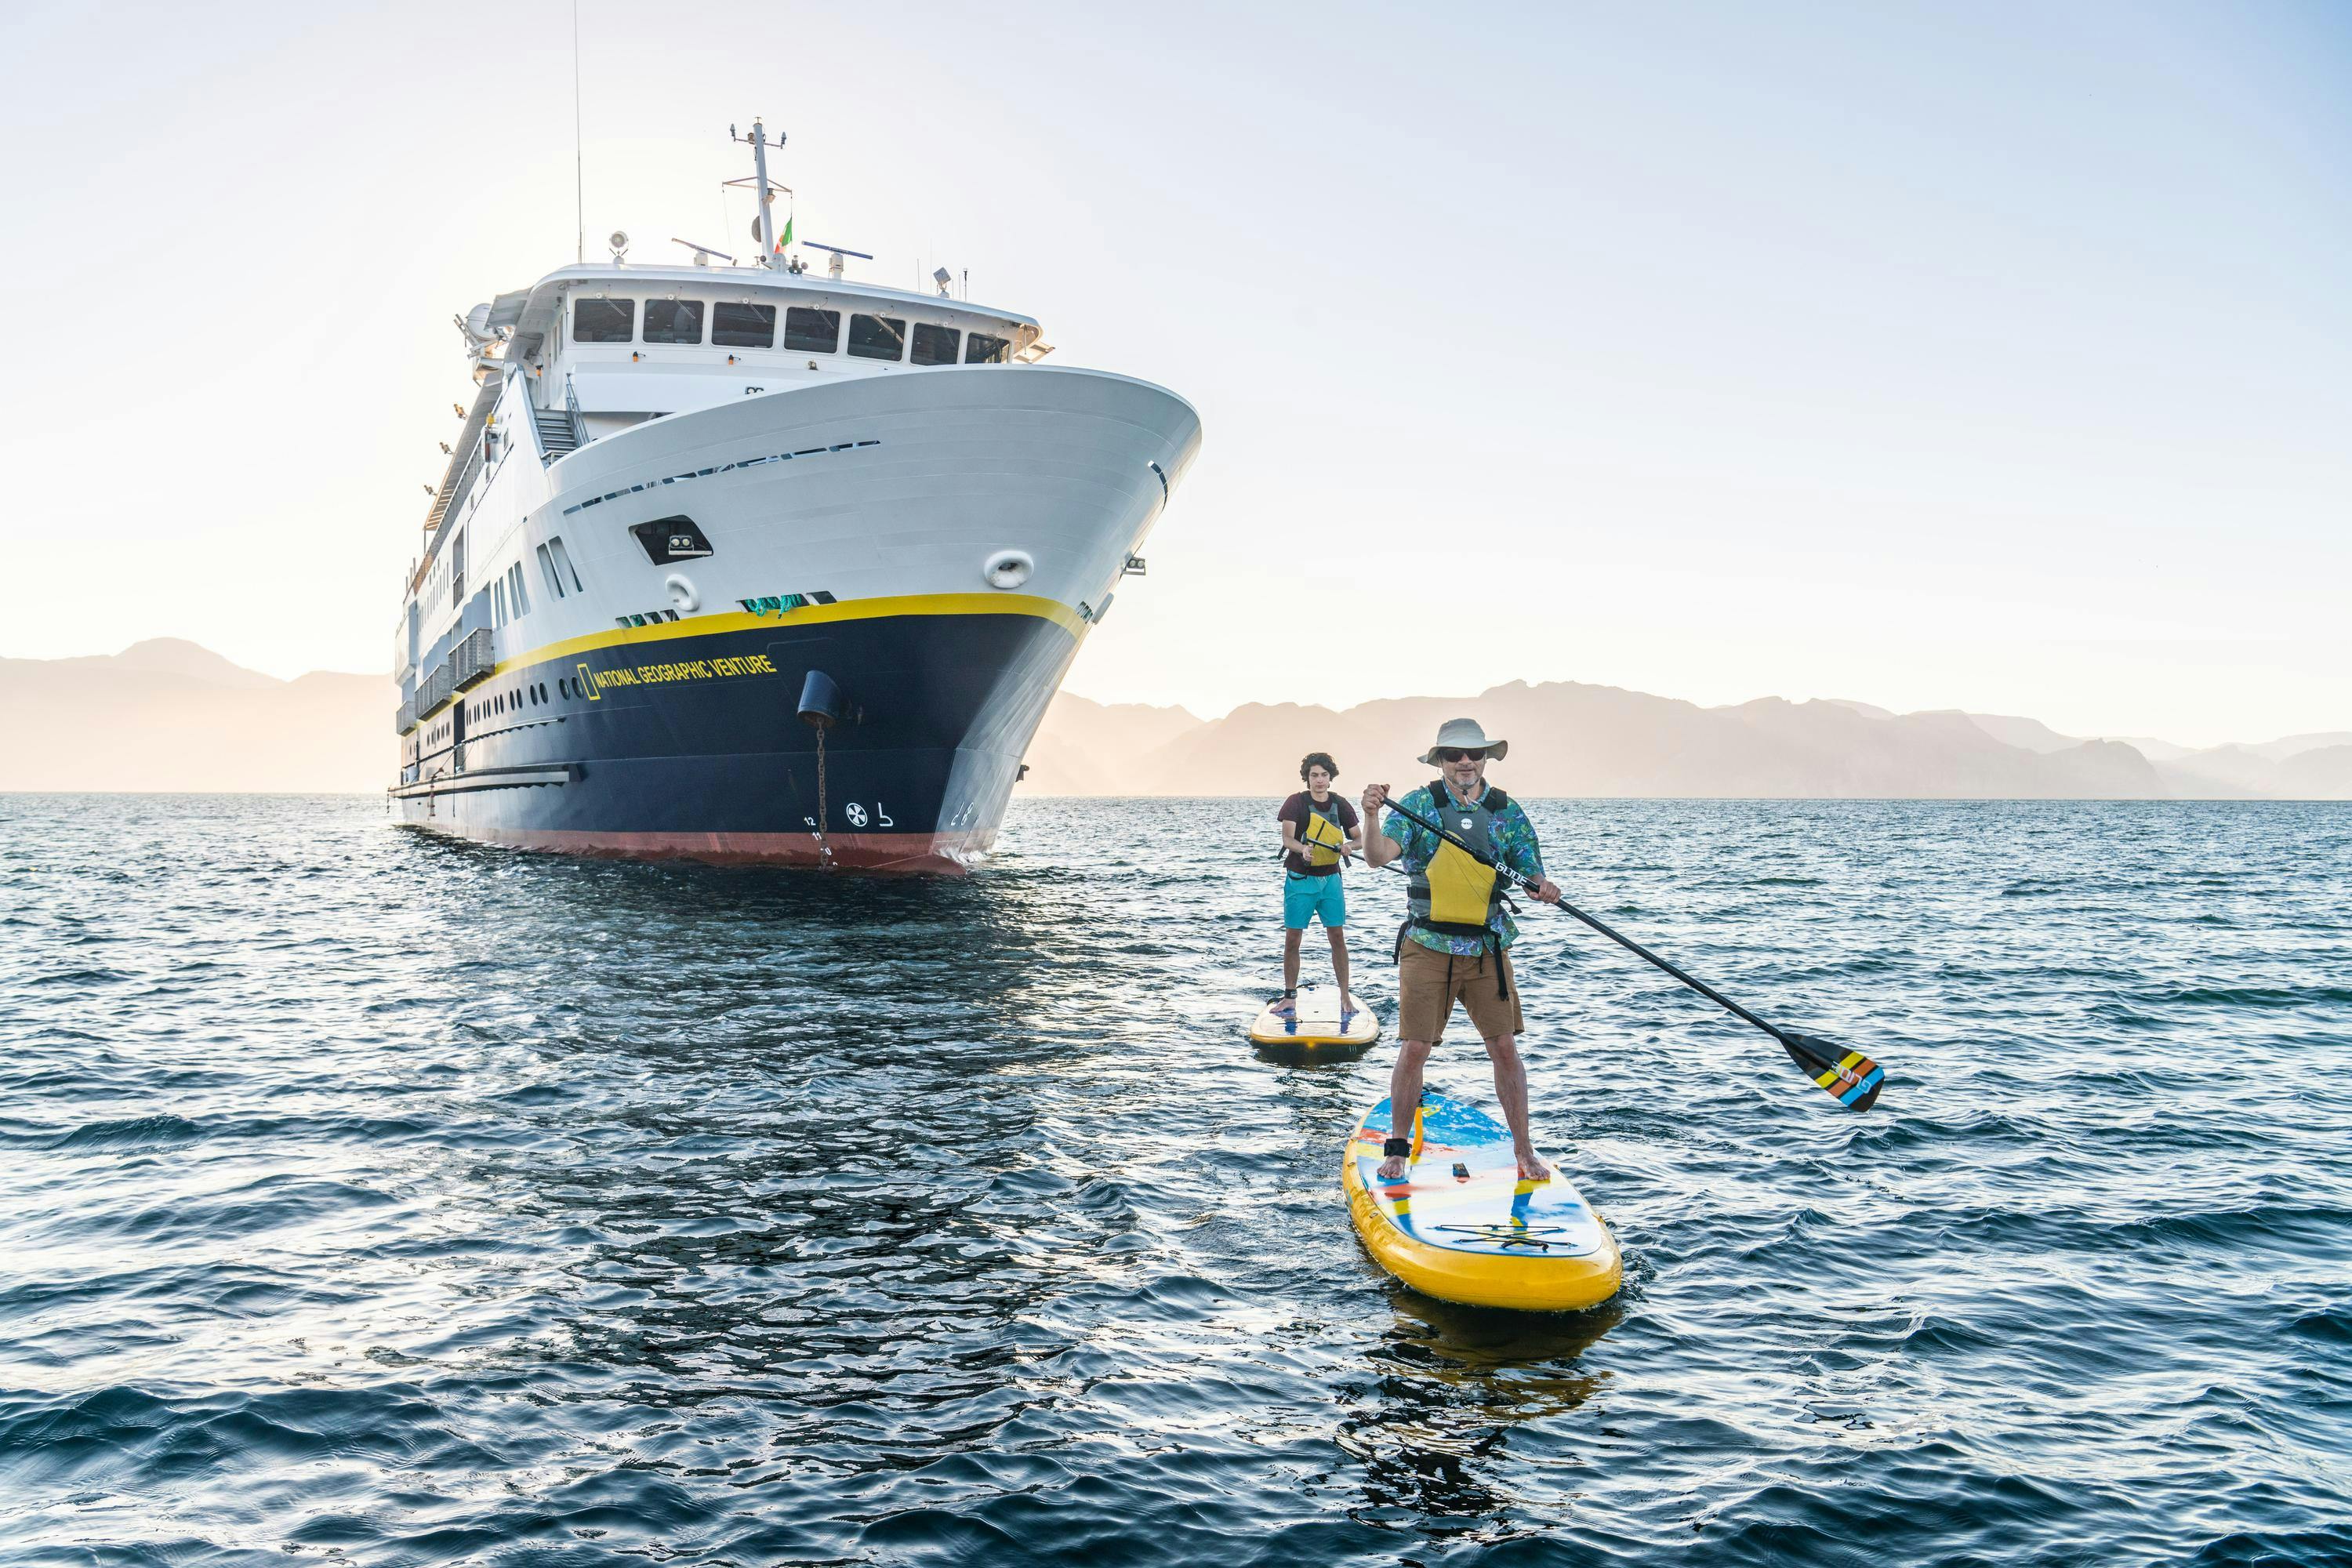 Guests Standup Paddleboarding  in San Evaristo from the ship National Geographic Venture, Baja California Sur, Mexico